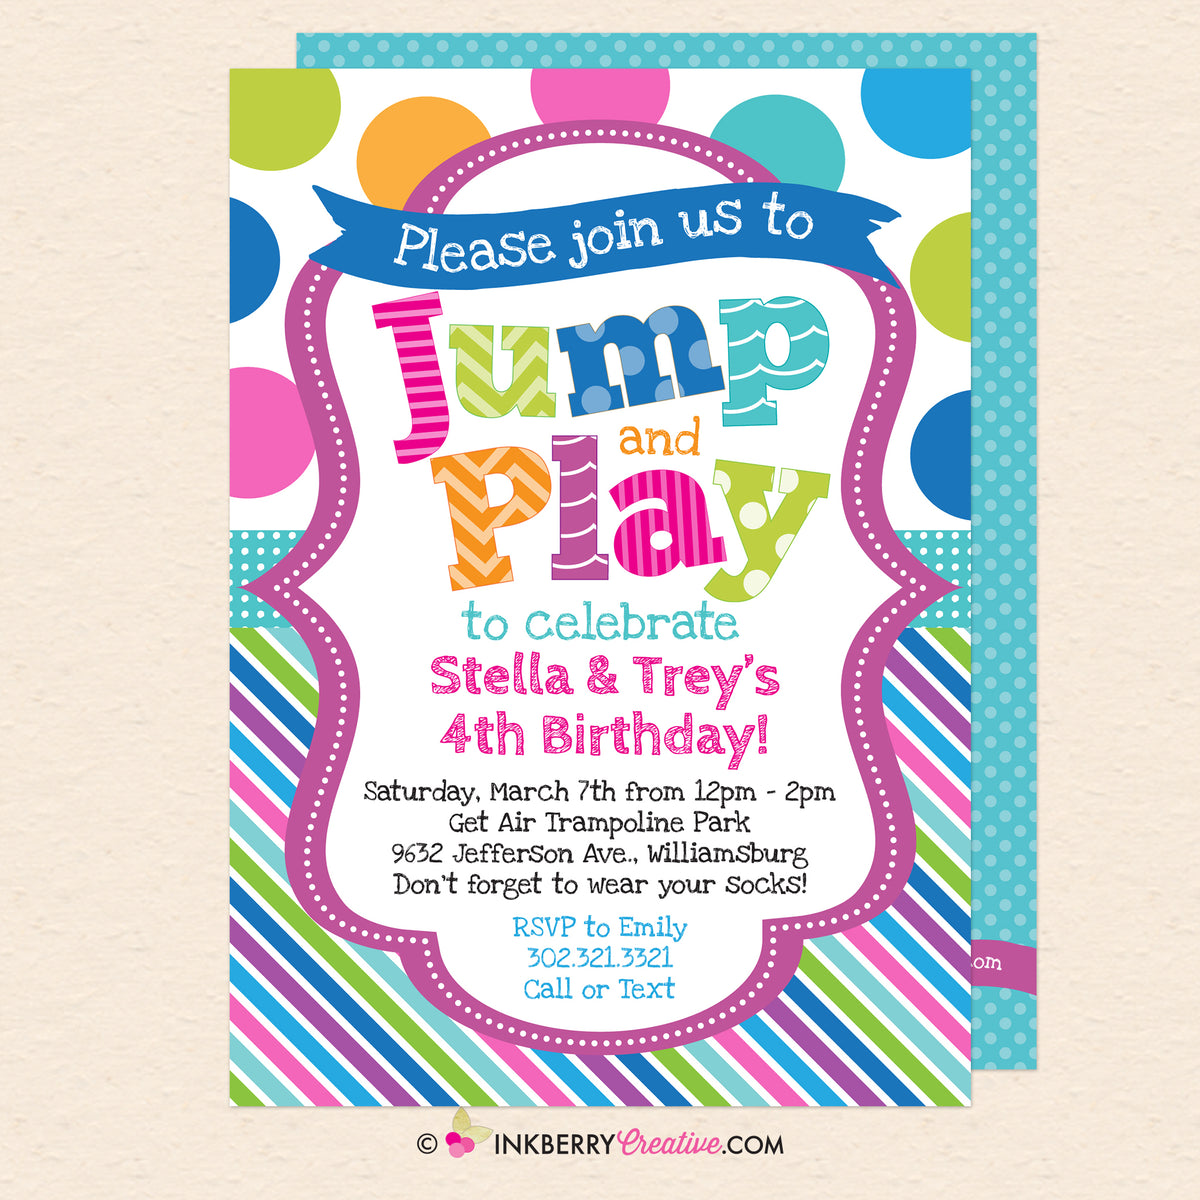 jump-and-play-kids-bounce-or-trampoline-birthday-party-invitation-blu